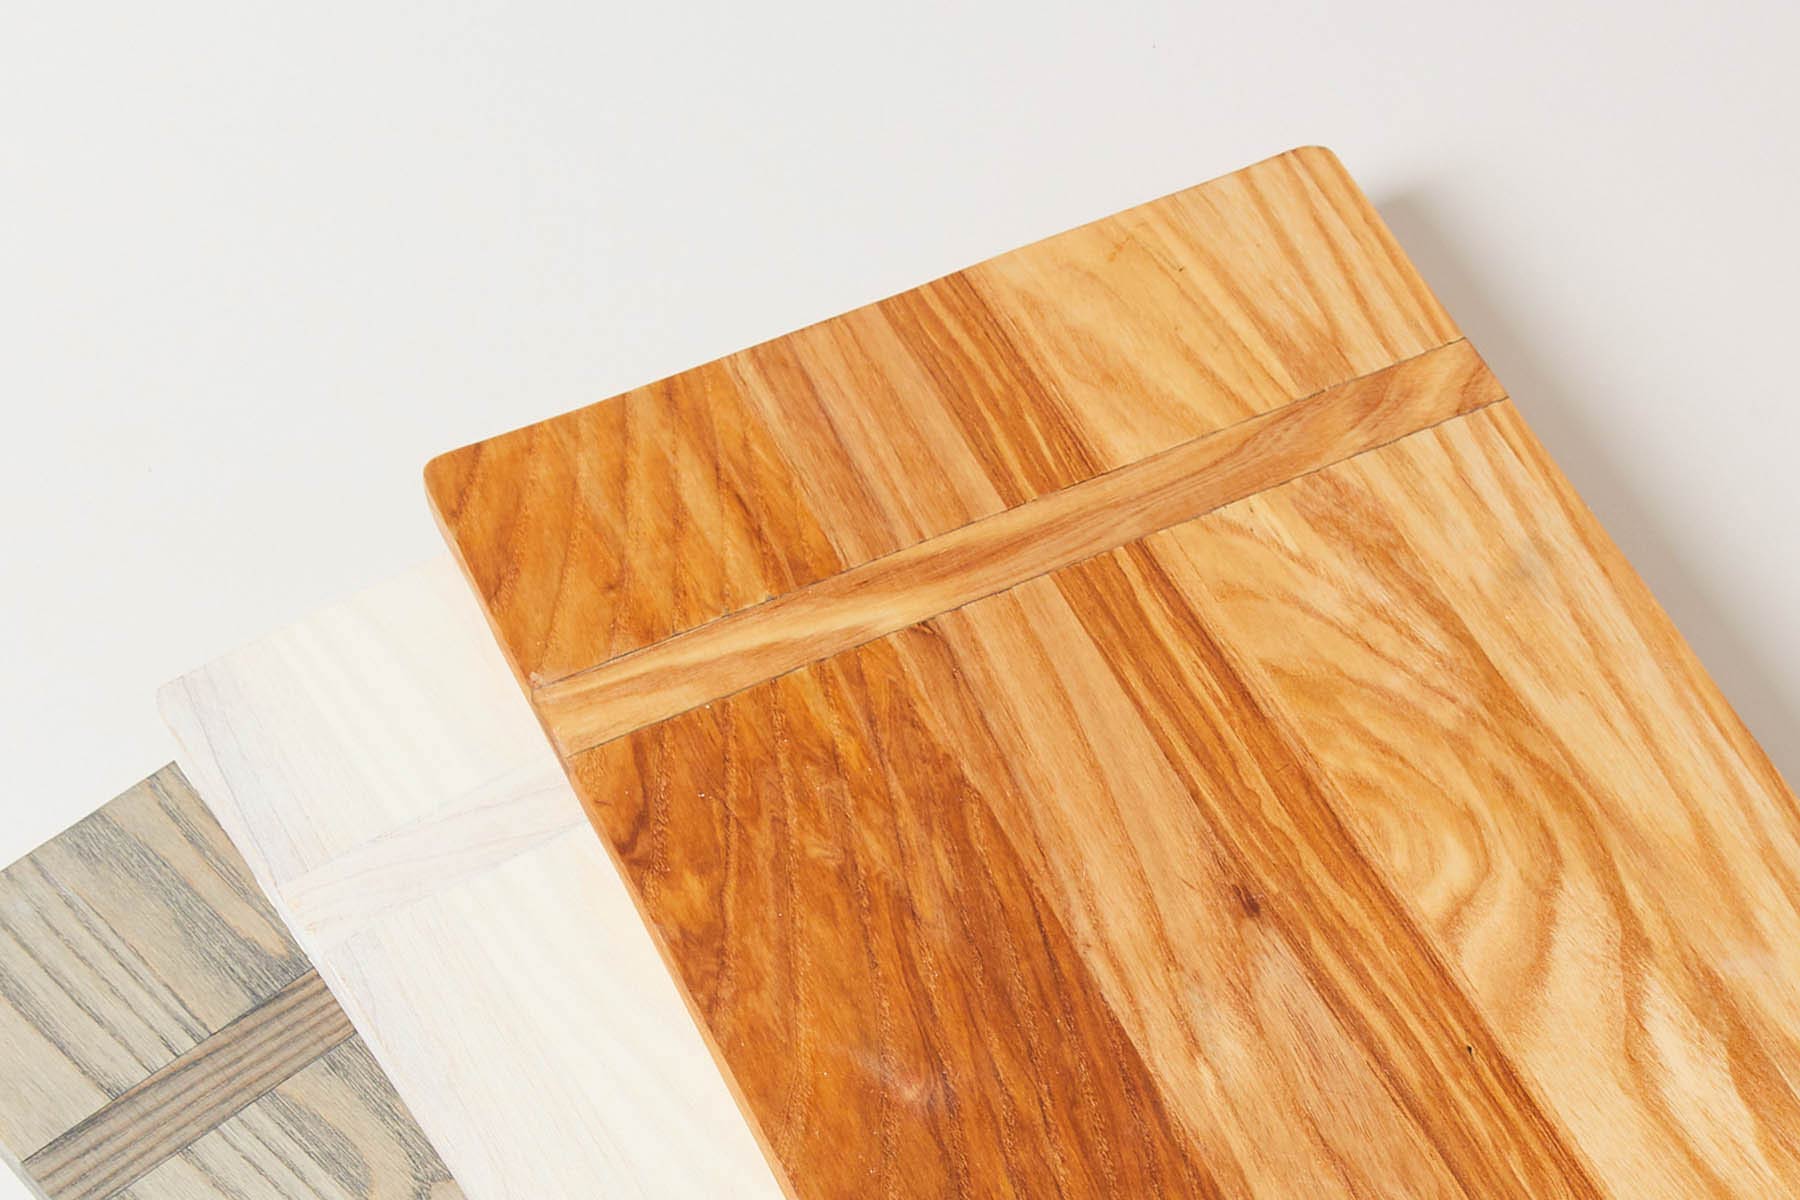 Pantry Charcuterie & Serving Board